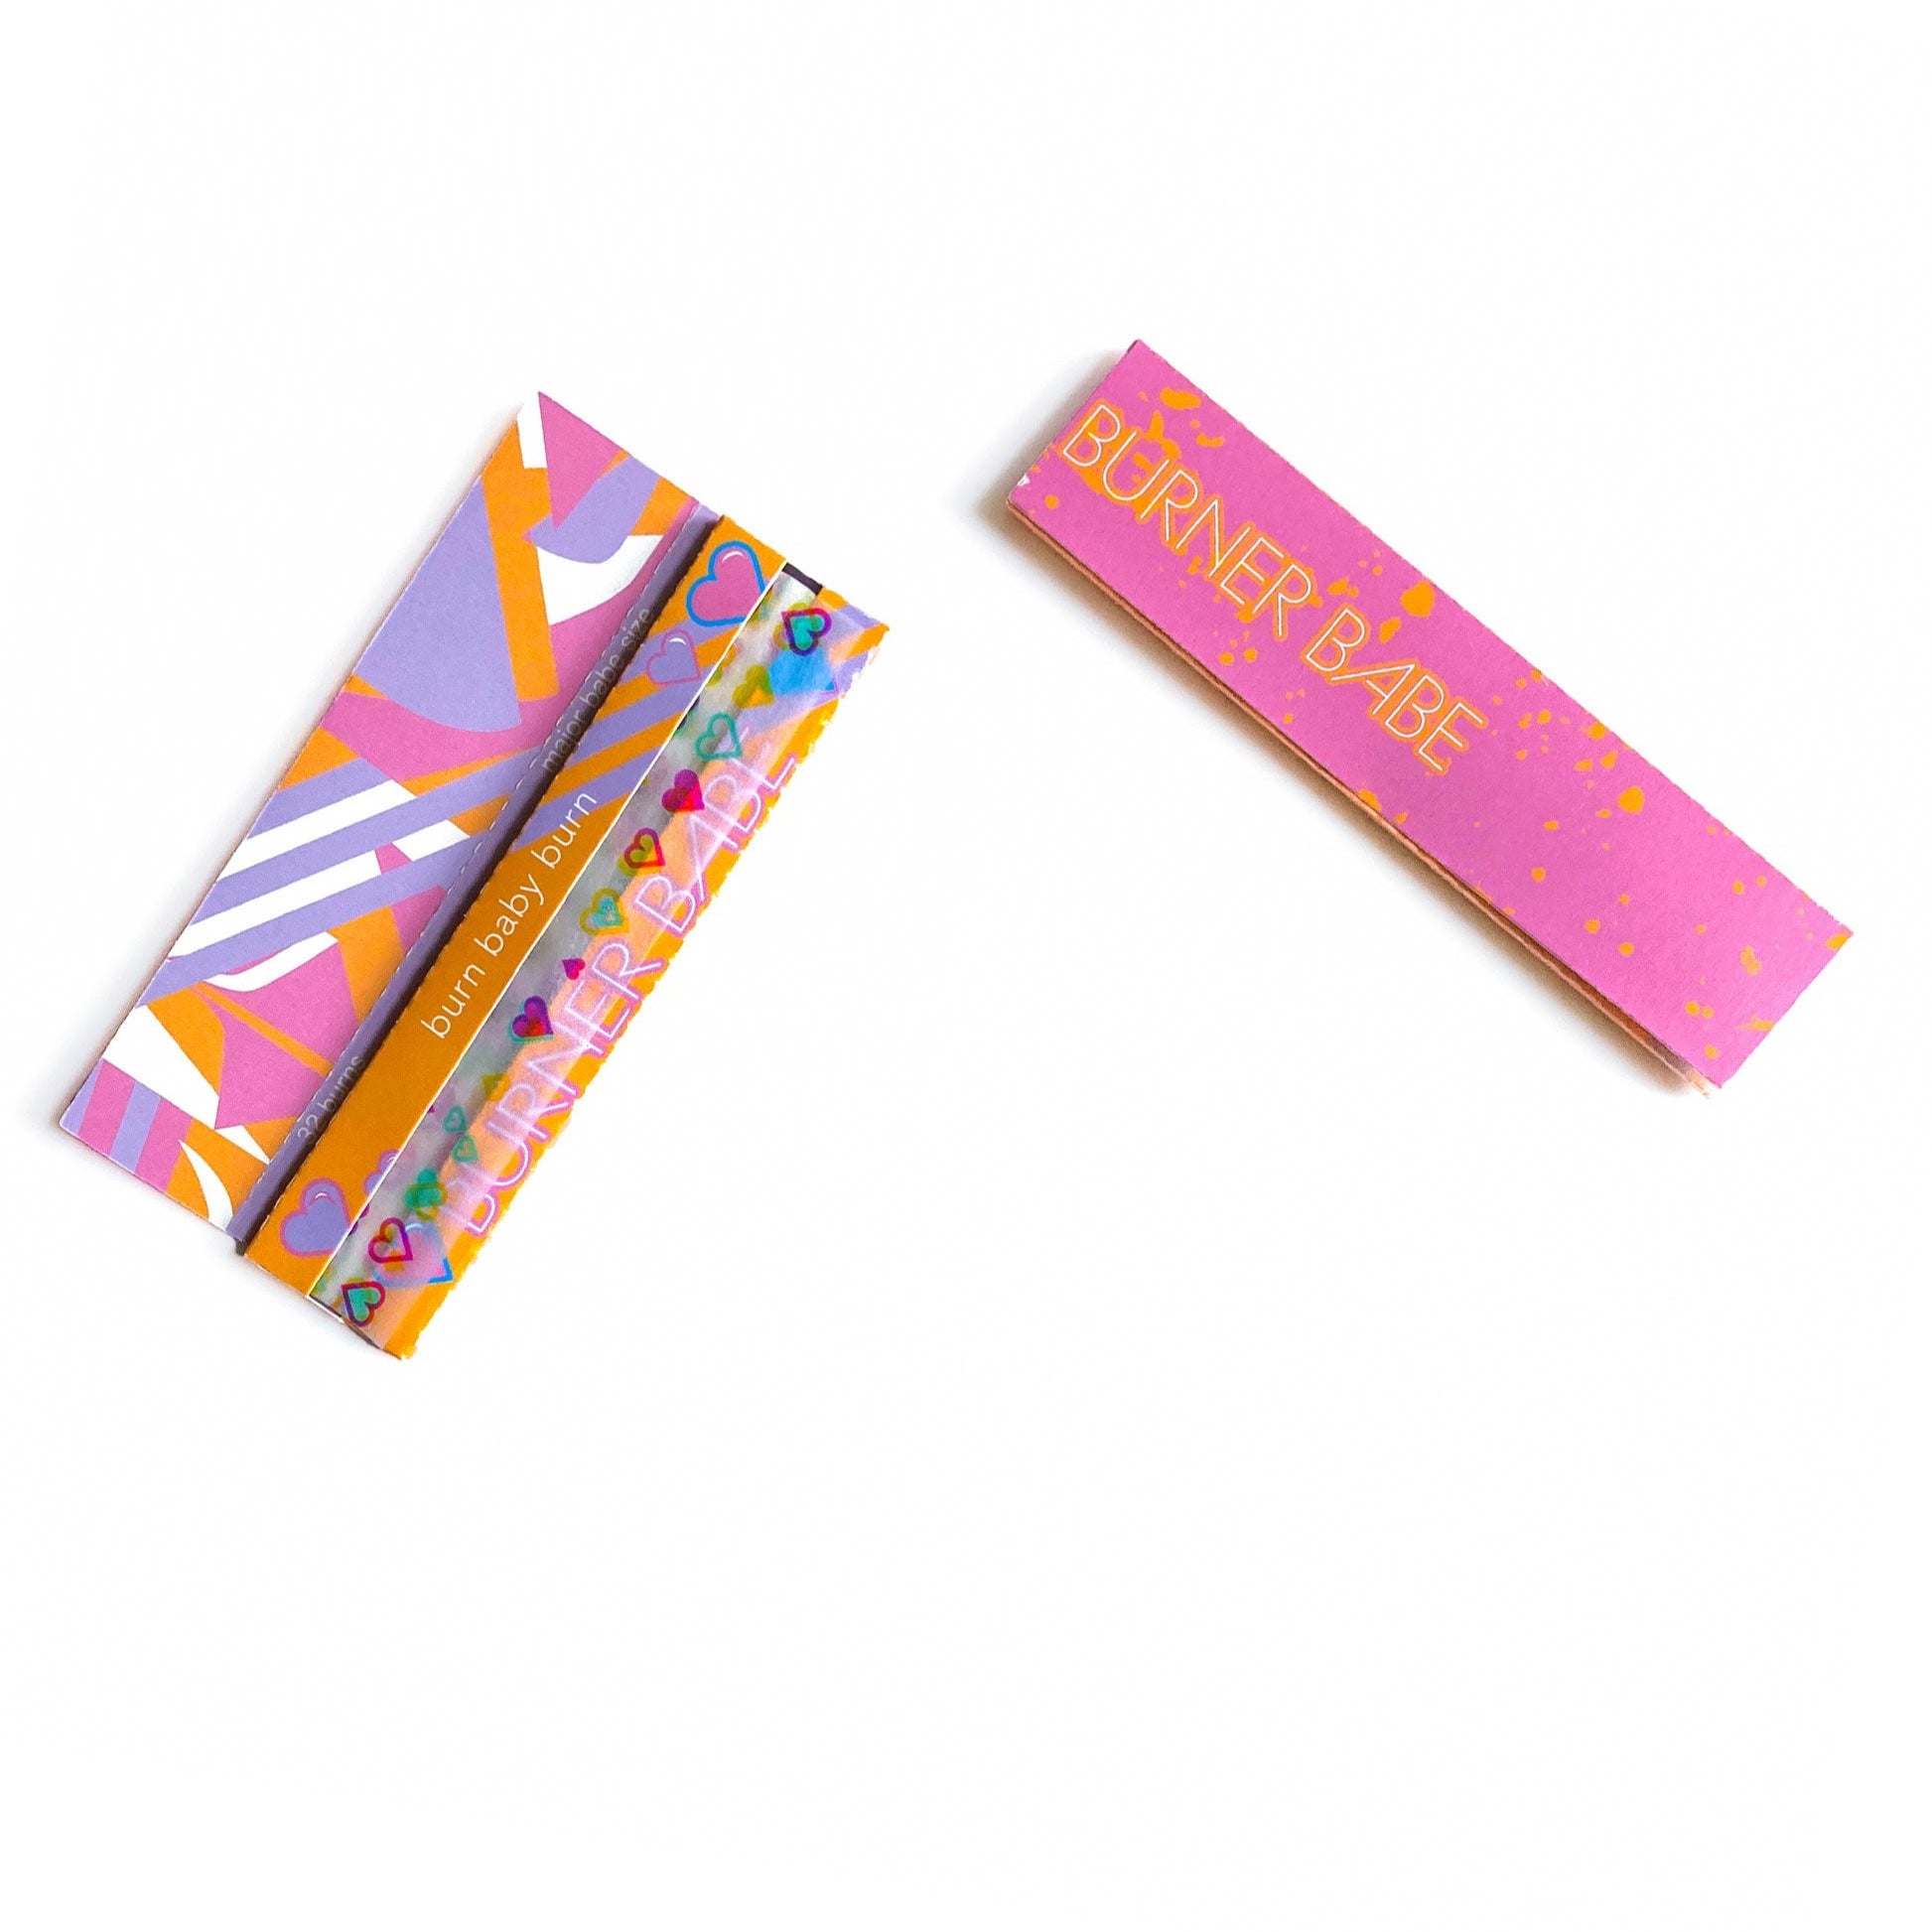 The Sweetheart Papers, set of 10: Major Babe size heart printed rolling papers. These designer papers are girly, pretty, vegan, cute, cool, king size, high quality, even burn, natural dyes, best tasting, slow burn.